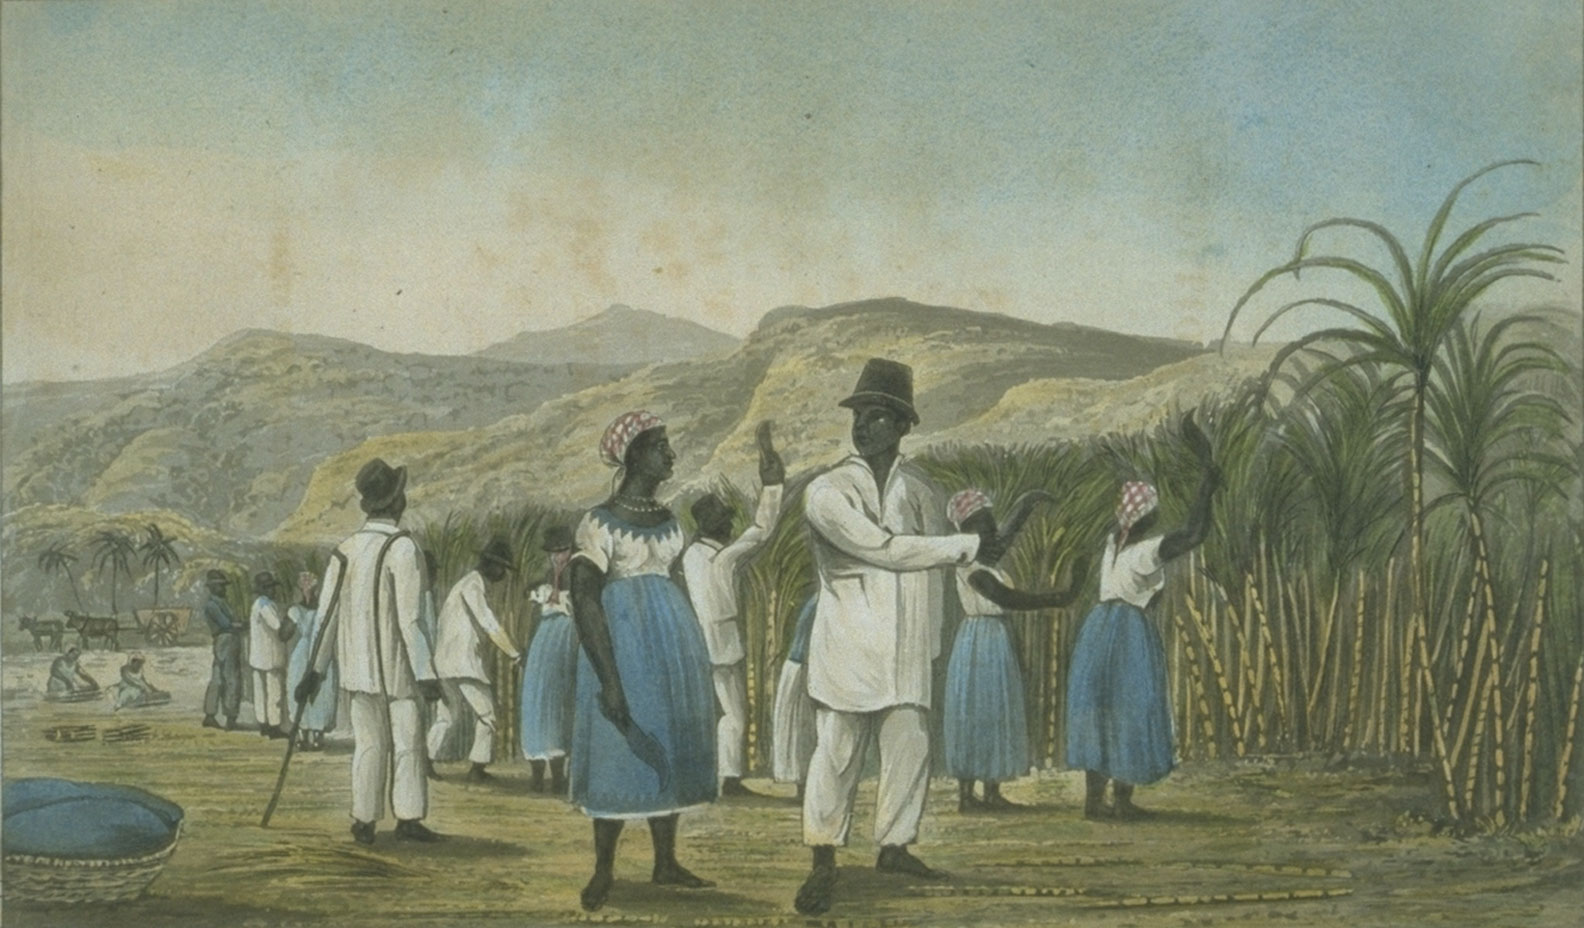 Color illustration of enslaved Black people harvesting sugarcane in Jamaica from the 1820s. The illustration shows men in white long-sleeved shirts and long pants and wearing broad-brimmed hats as well as women in white shirts and blue skirts with their hair wrapped in kerchiefs. Some of the people are cutting cane using curved blades, whereas one man and one woman stand in the foreground, possibly talking. A man with his back to the viewer, a slave driver, holds a pole and is watching over the other slaves.